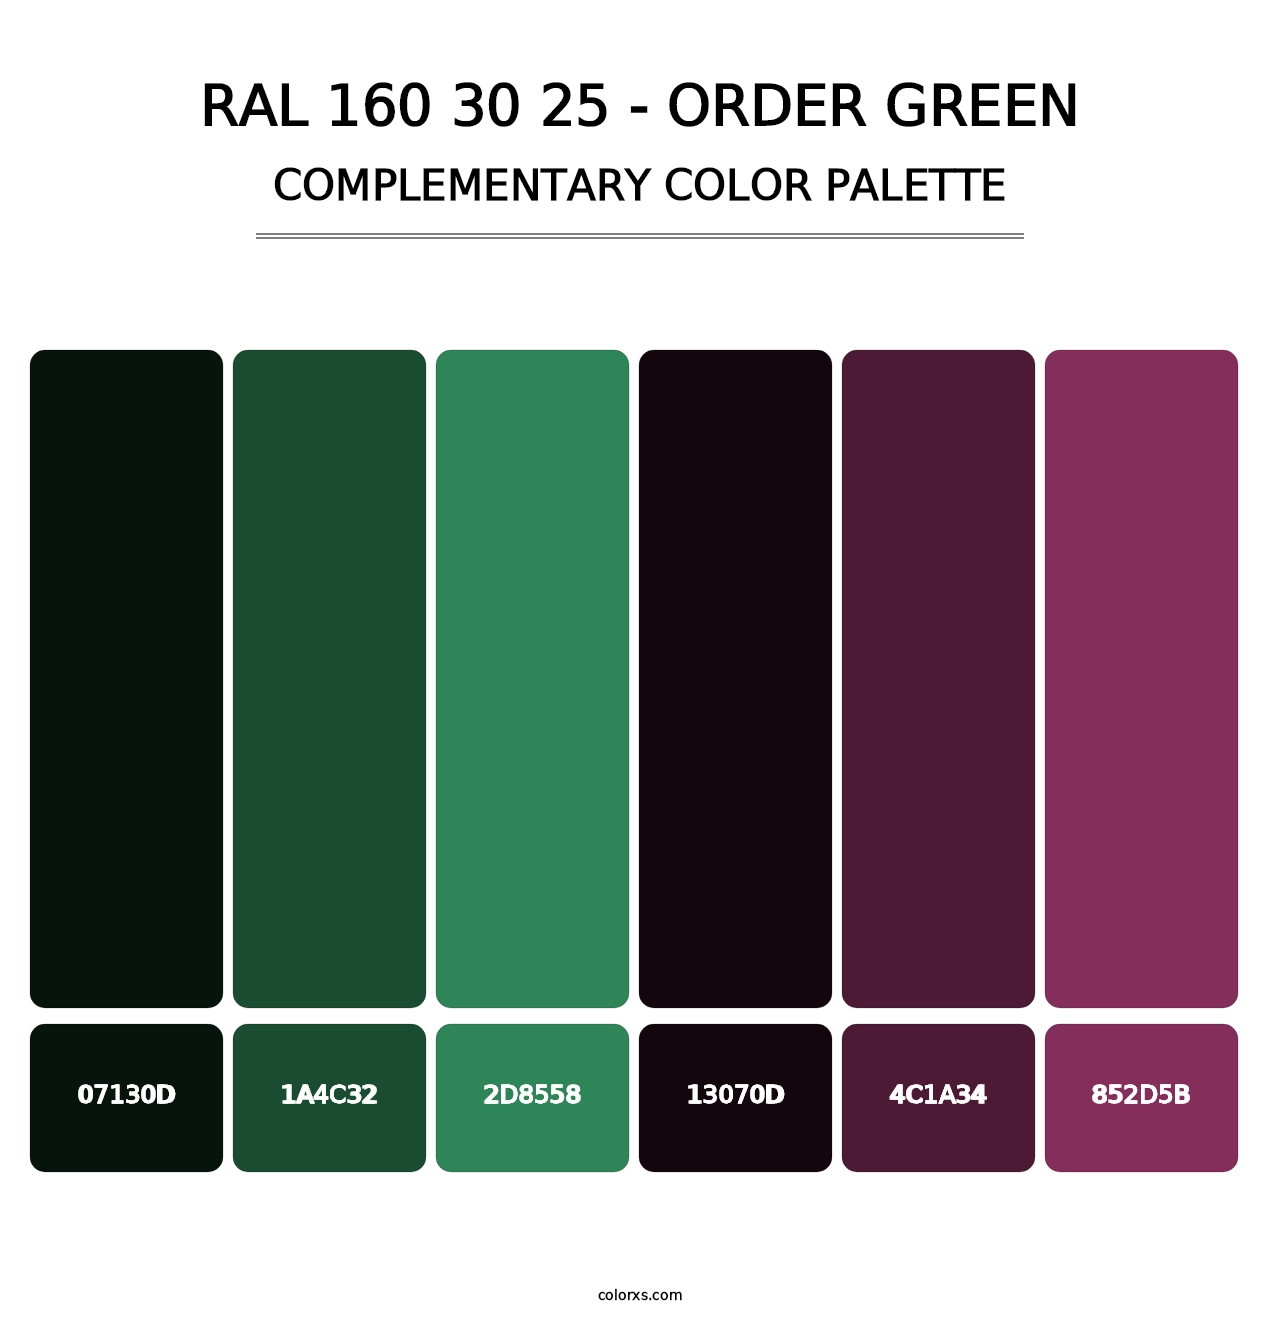 RAL 160 30 25 - Order Green - Complementary Color Palette